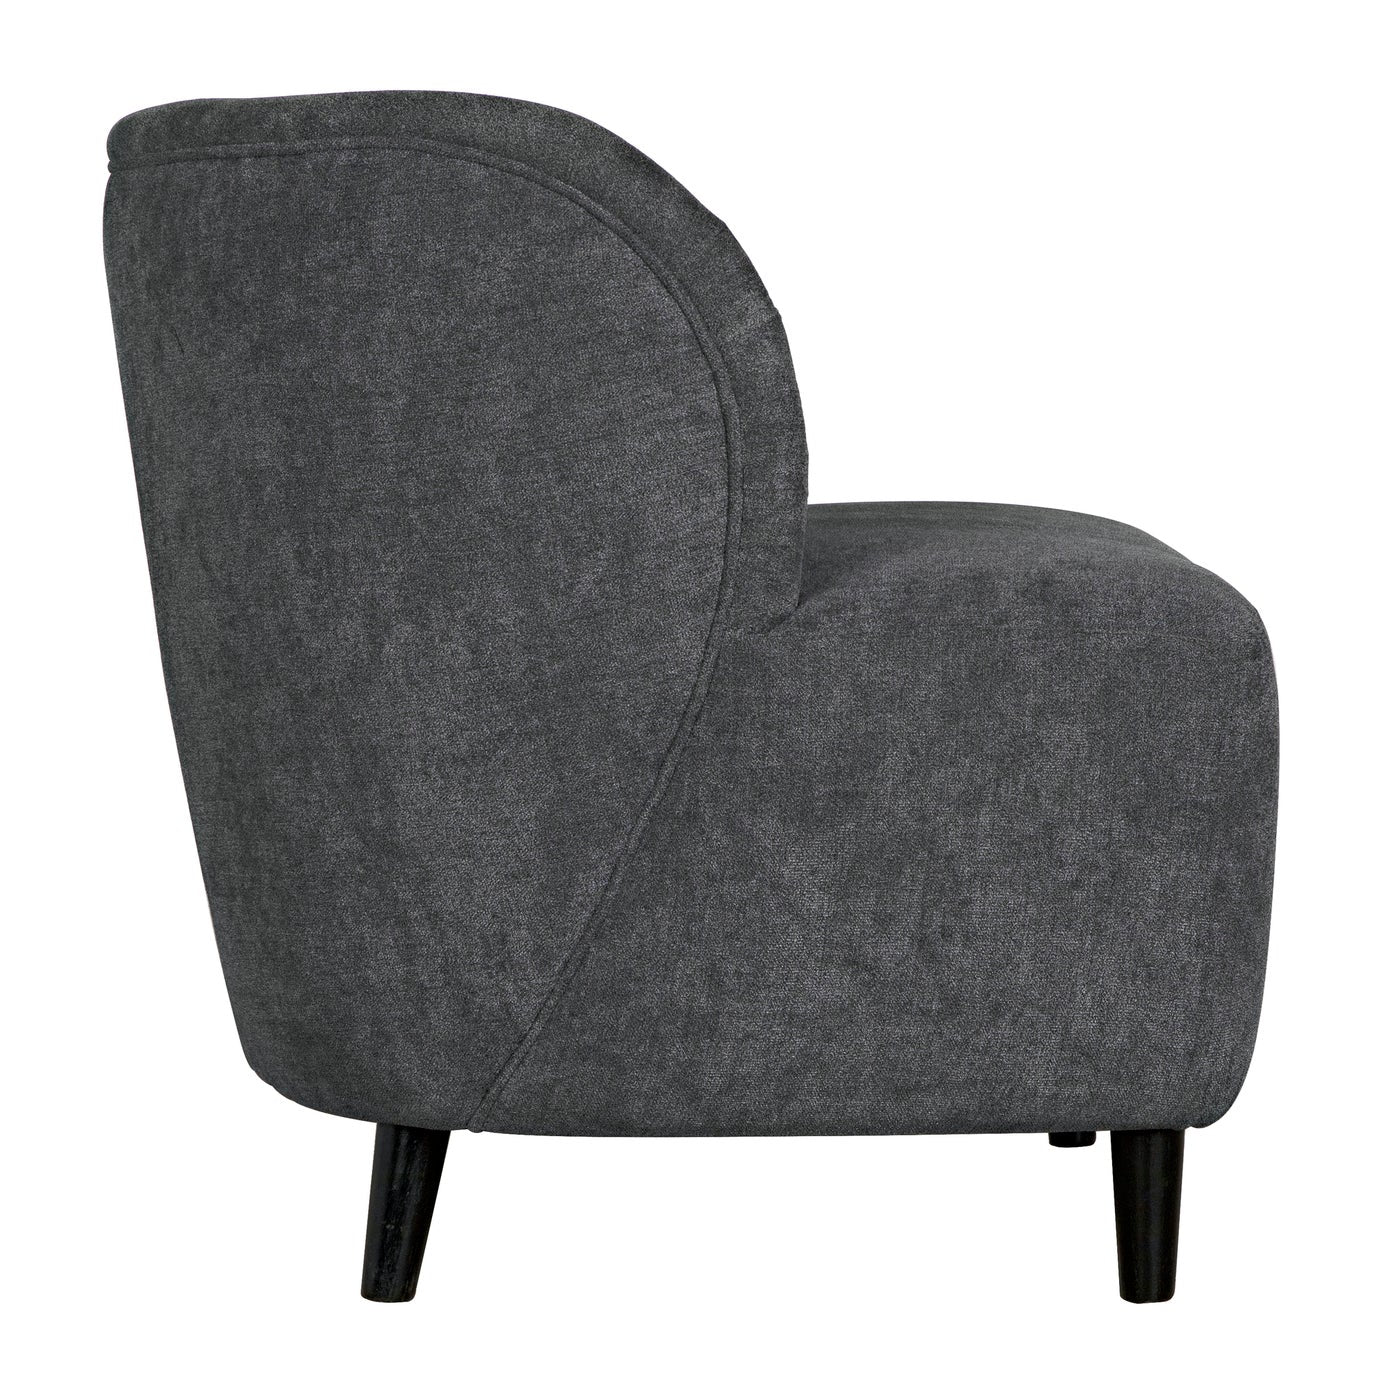 Laffont Chair with Grey Fabric